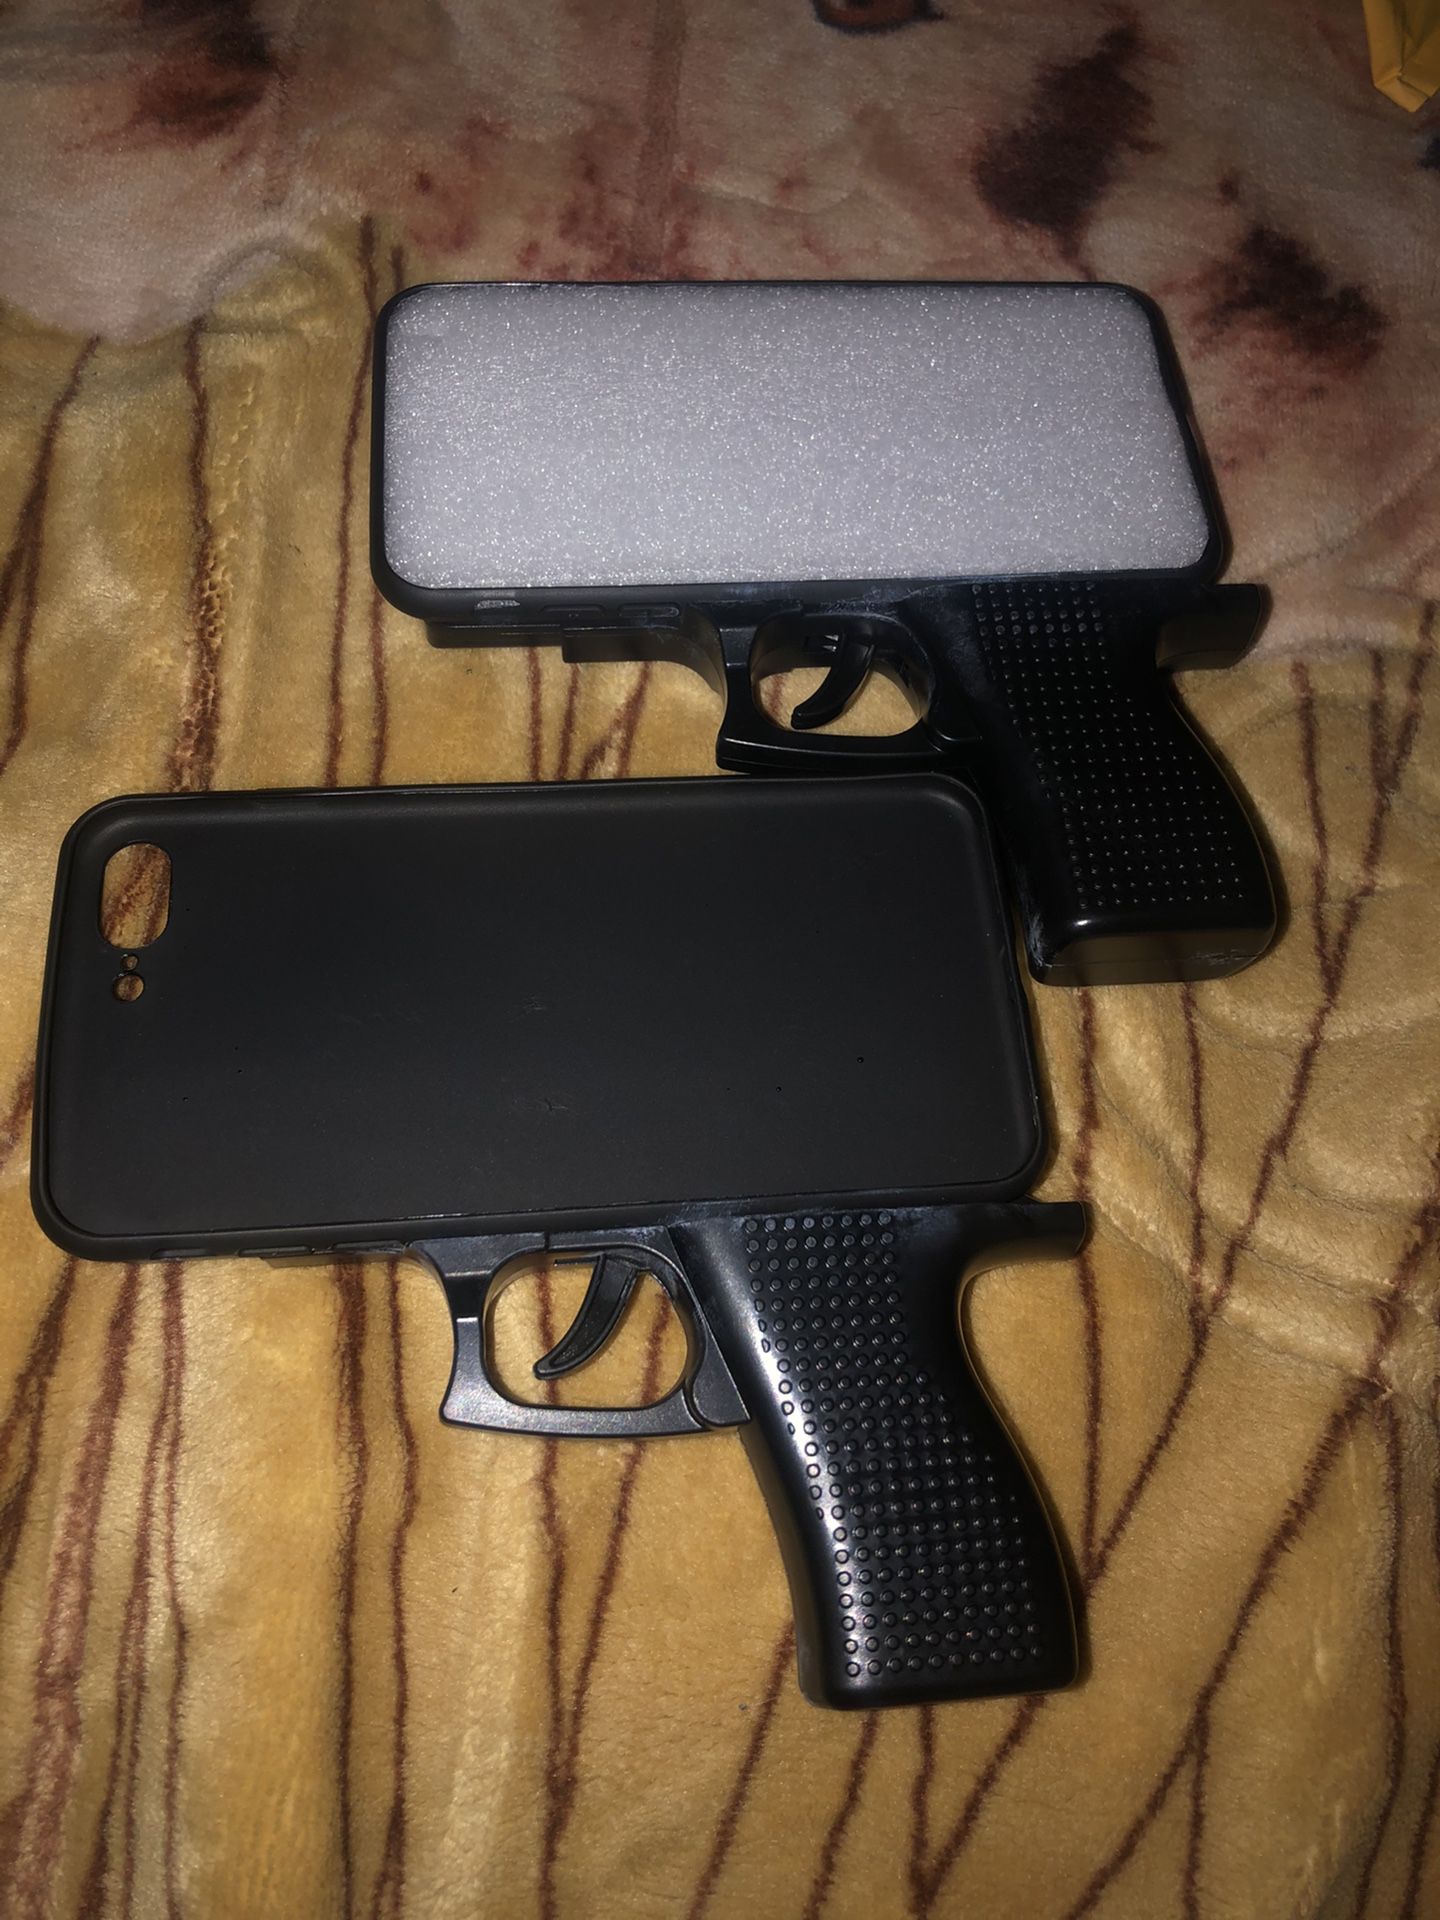 Luxury 3D IPhone case. Silicone toy pistol